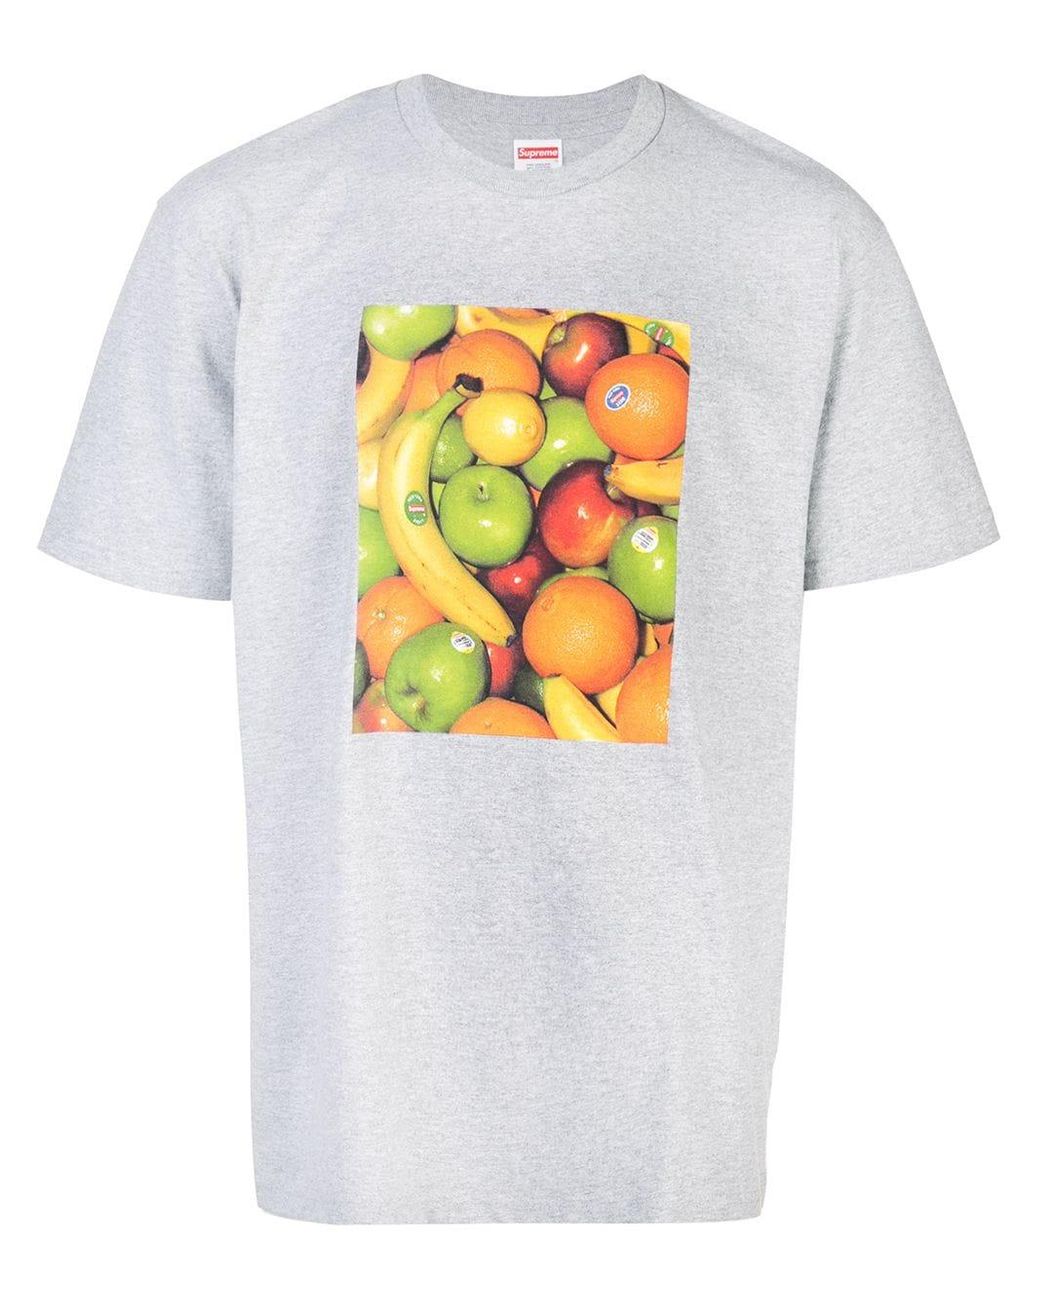 Supreme Cotton Fruit Print T-shirt in Grey (Gray) for Men - Lyst